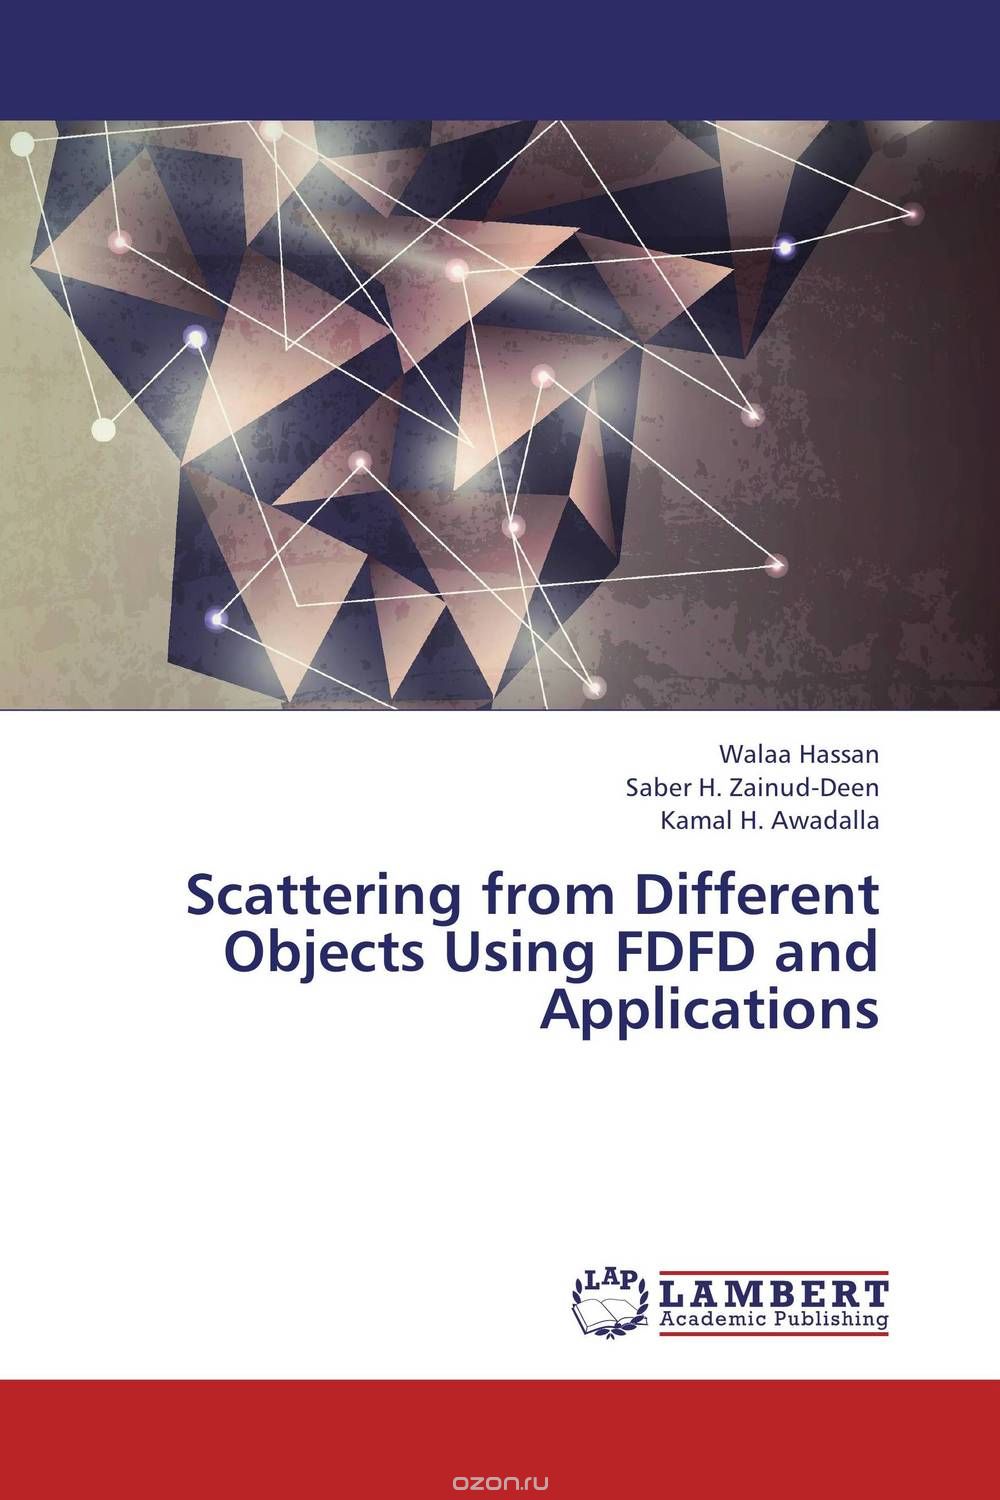 Scattering from Different Objects Using FDFD and Applications